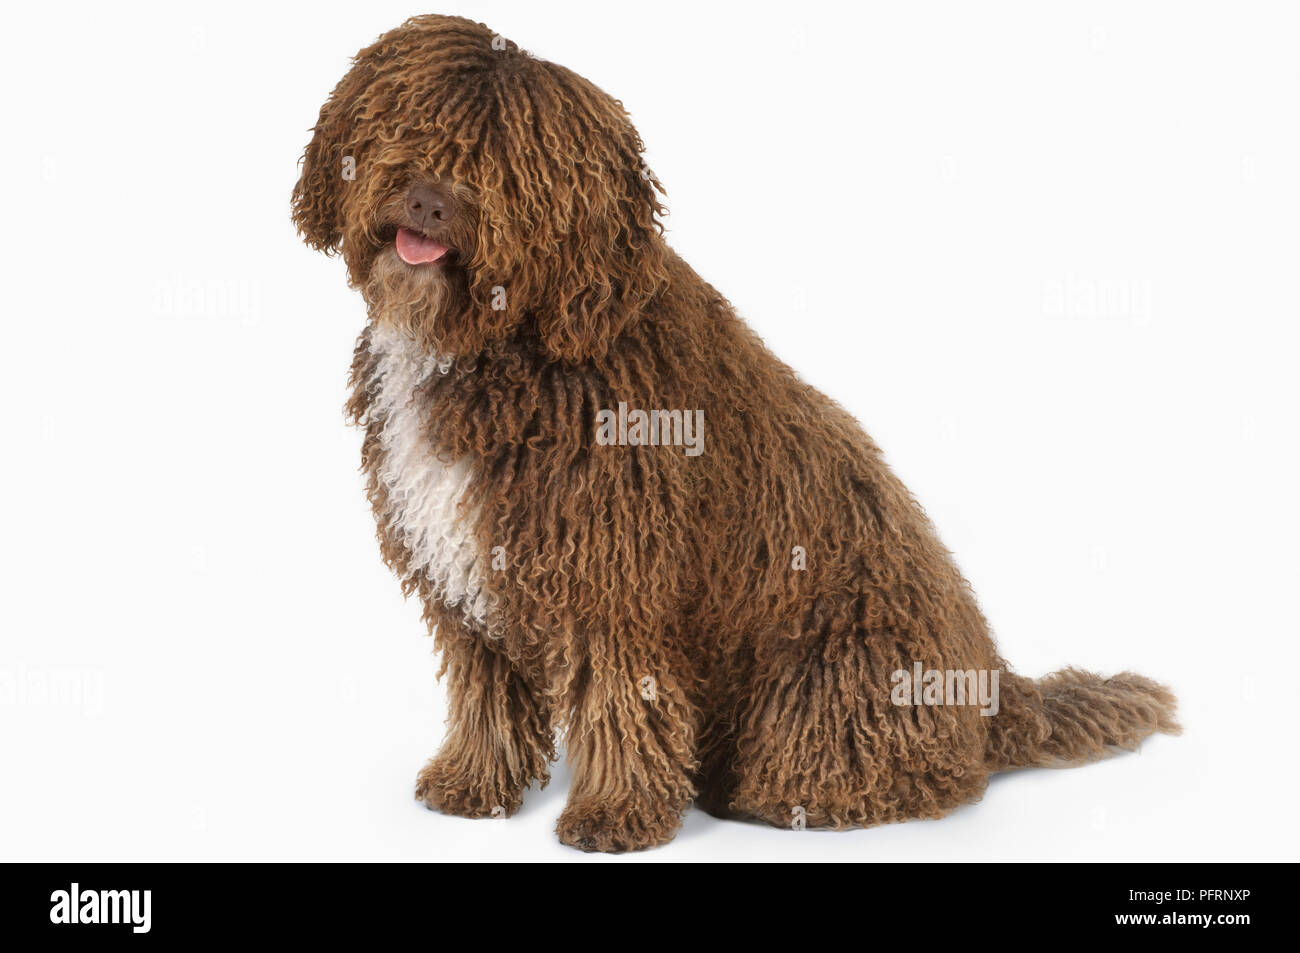 Panting Brown And White Curly Coated Spanish Water Dog Perro De Agua Espanol Sitting Stock Photo Alamy